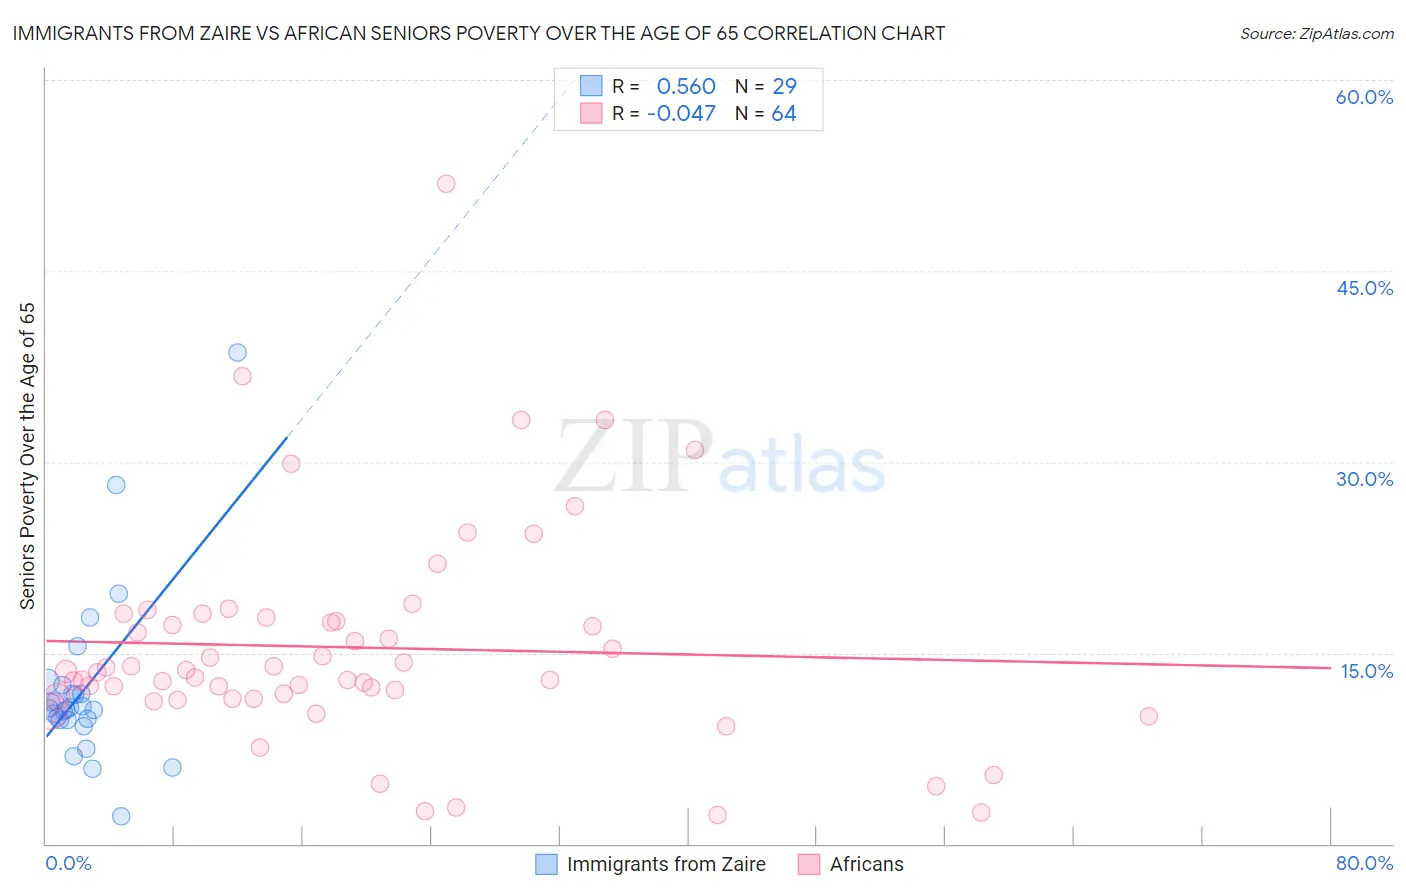 Immigrants from Zaire vs African Seniors Poverty Over the Age of 65